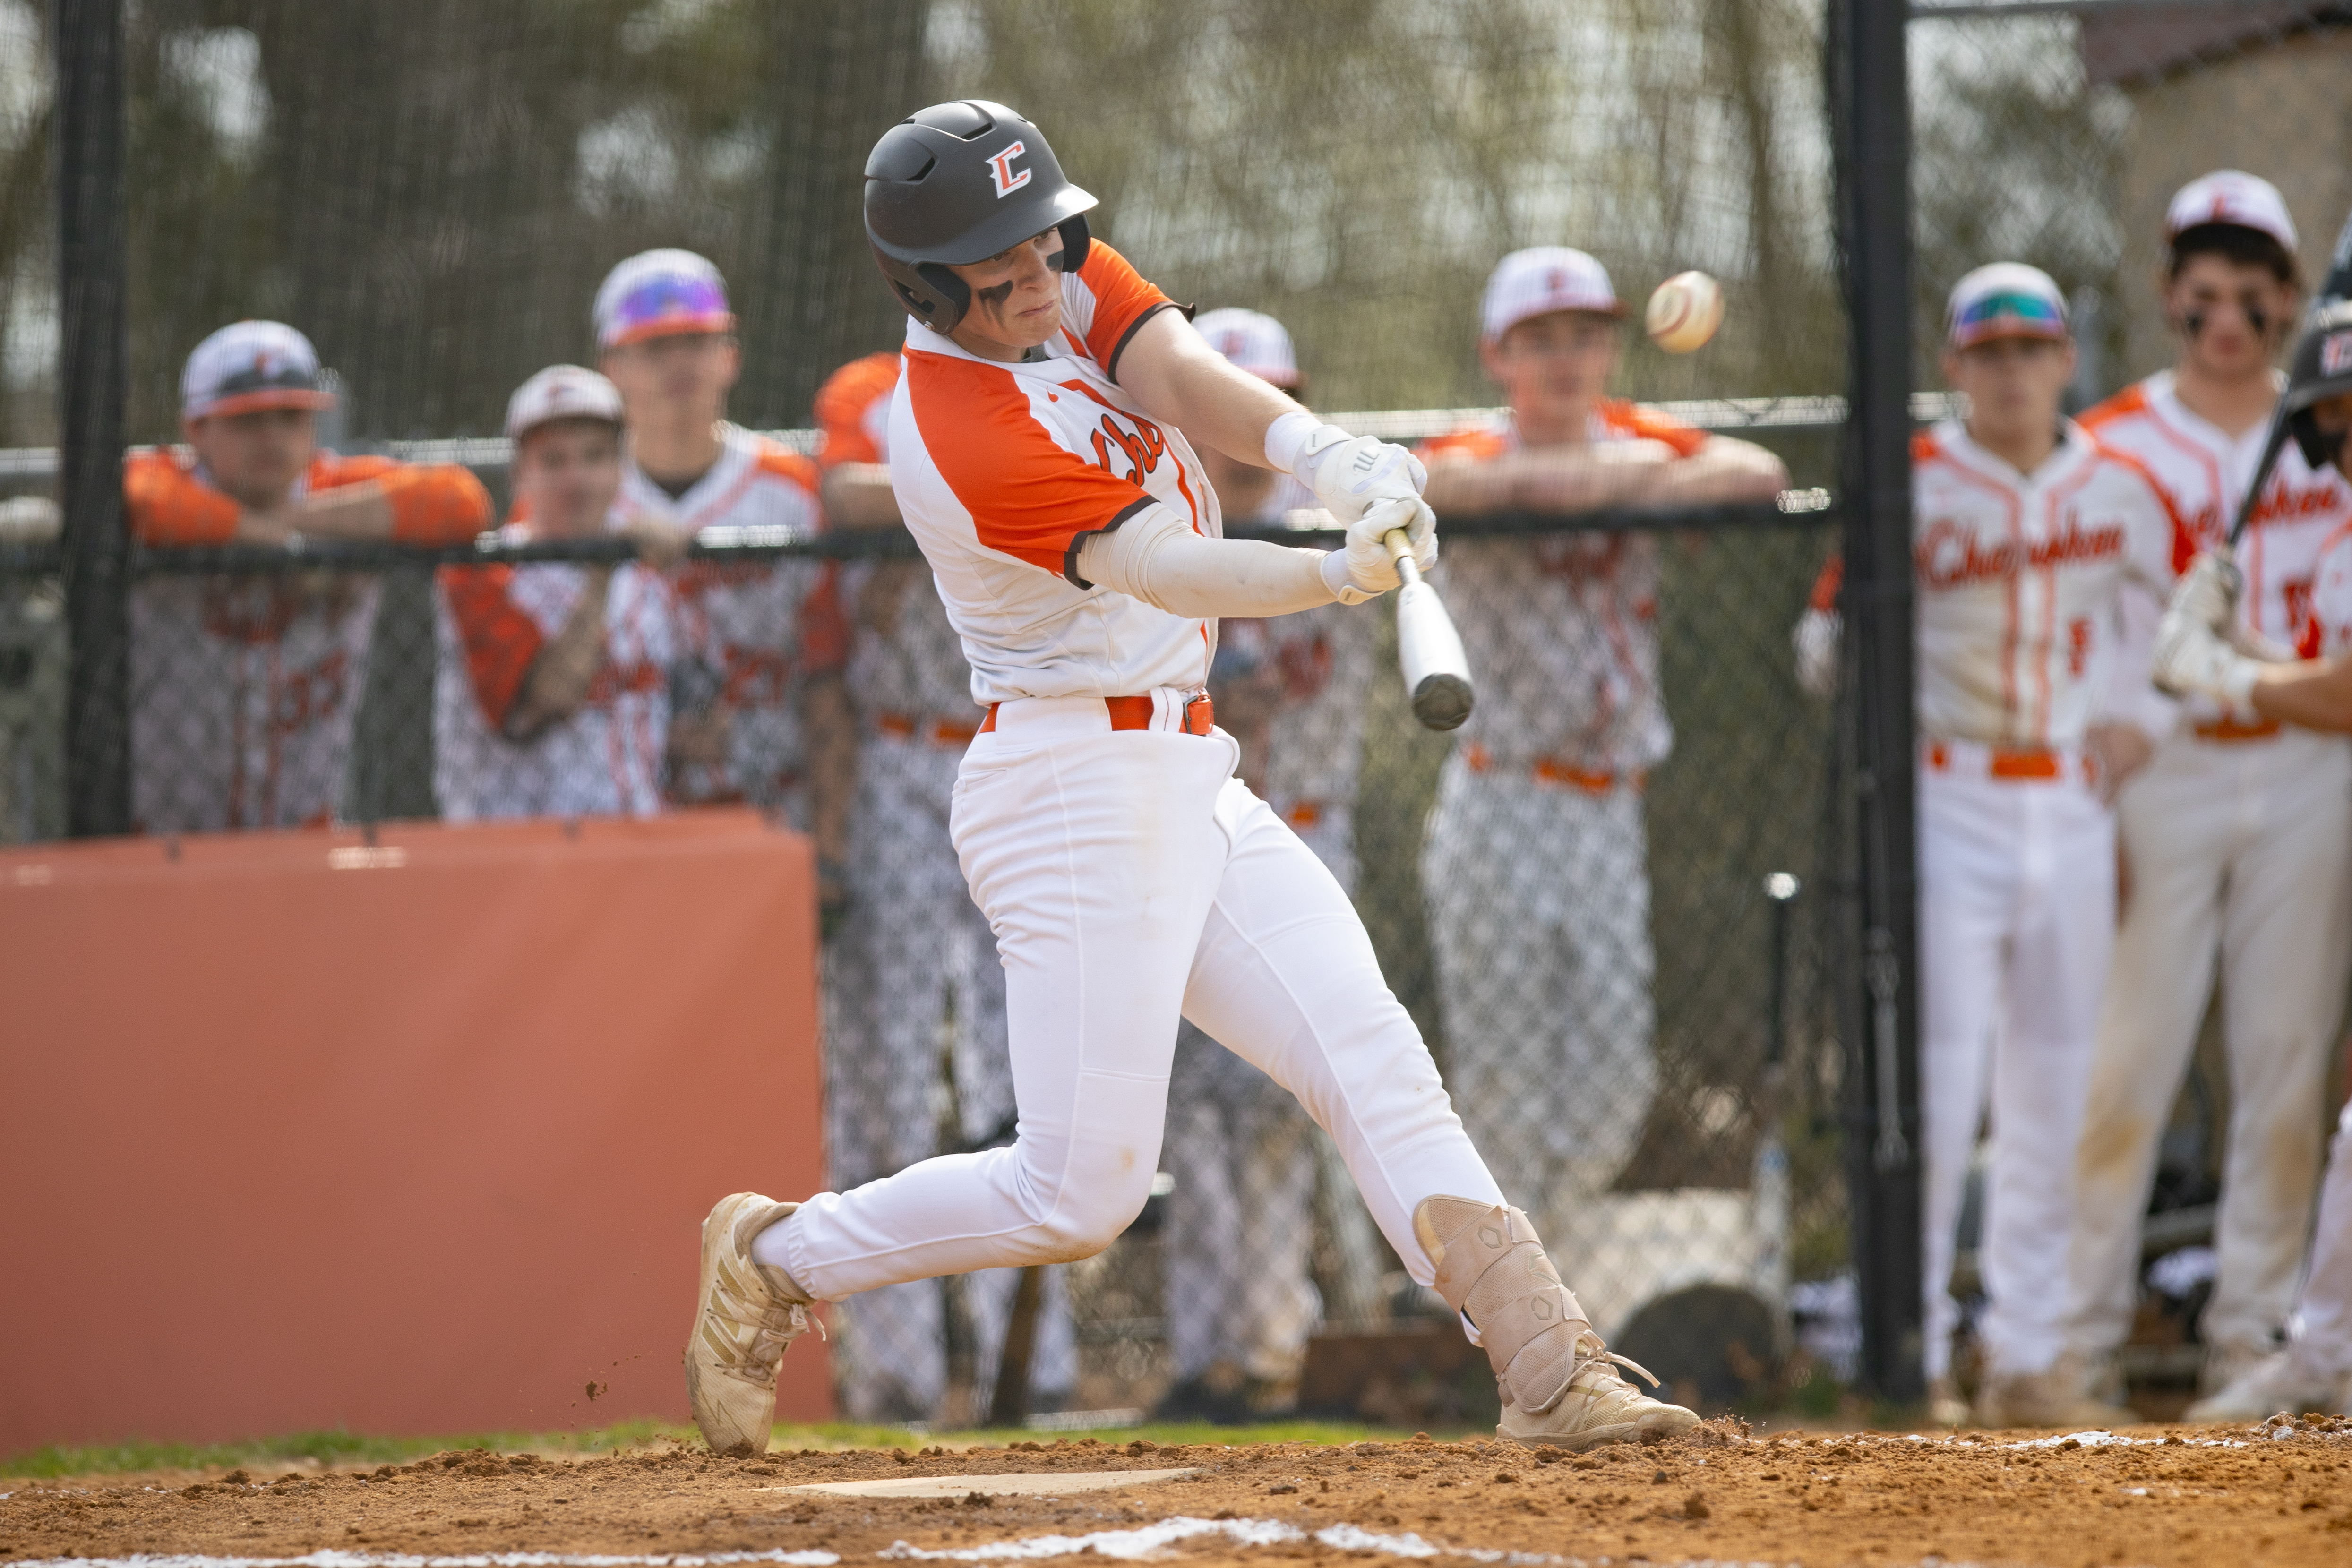 Evan Brown (2) of Cherokee, connects with the ball in Marlton, NJ on Monday, April 3, 2023.